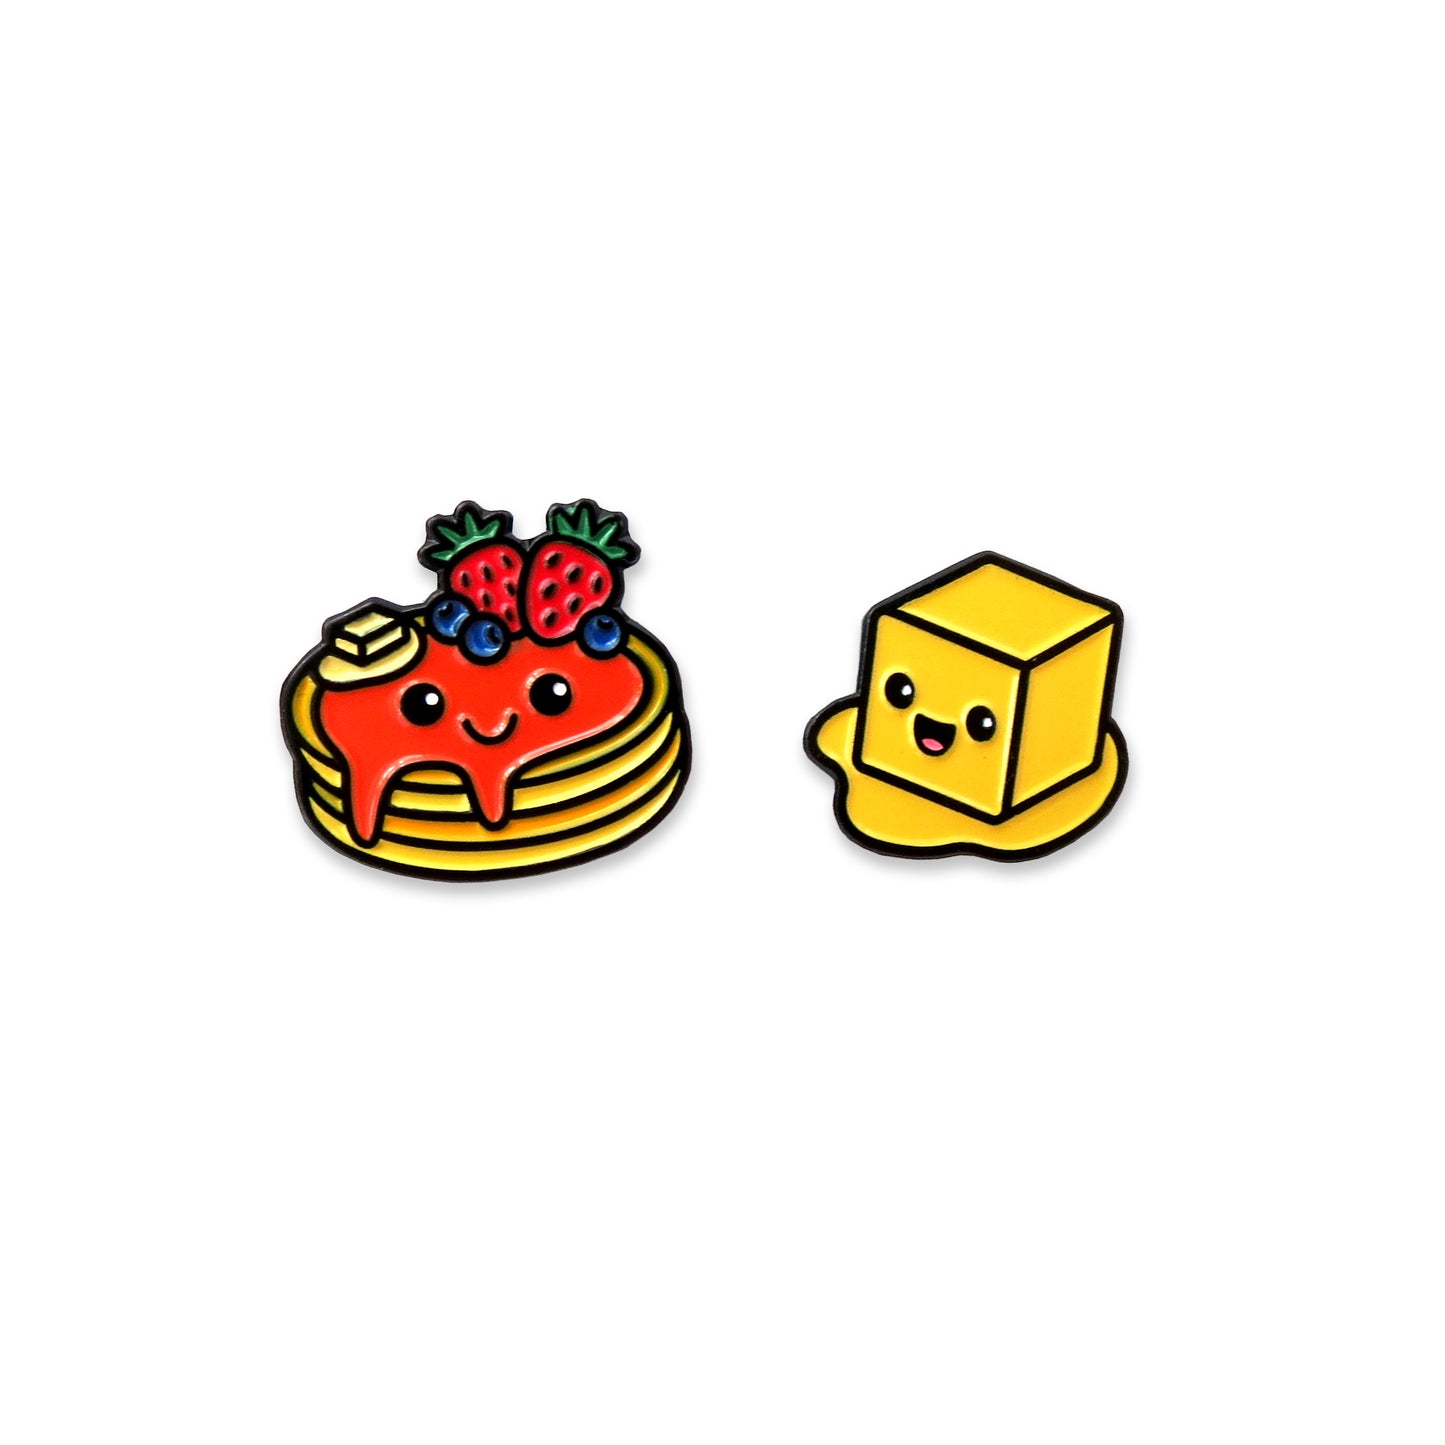 Pancake and Butter enamel pins on white background